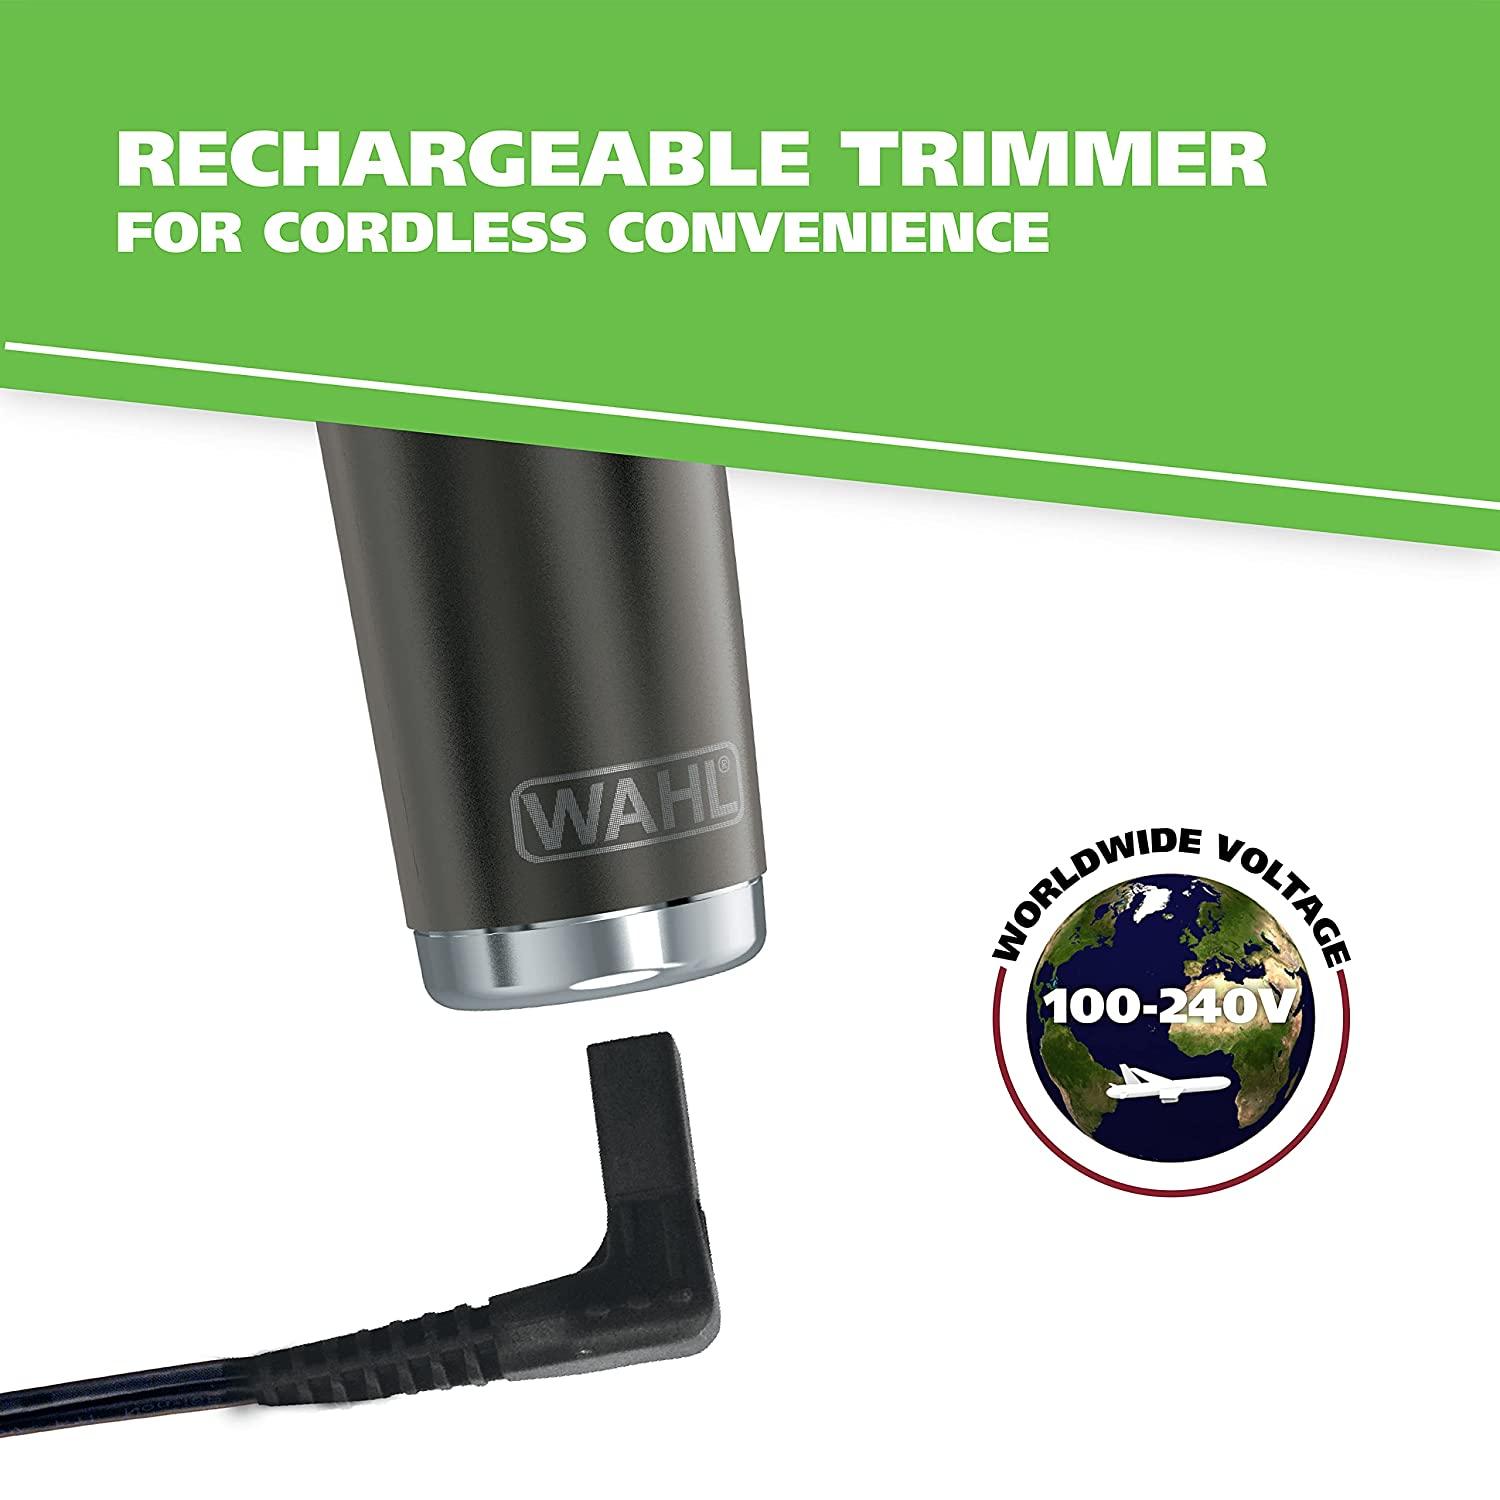 Brushed Stainless Steel Lithium-Ion 2.0 Trimmer